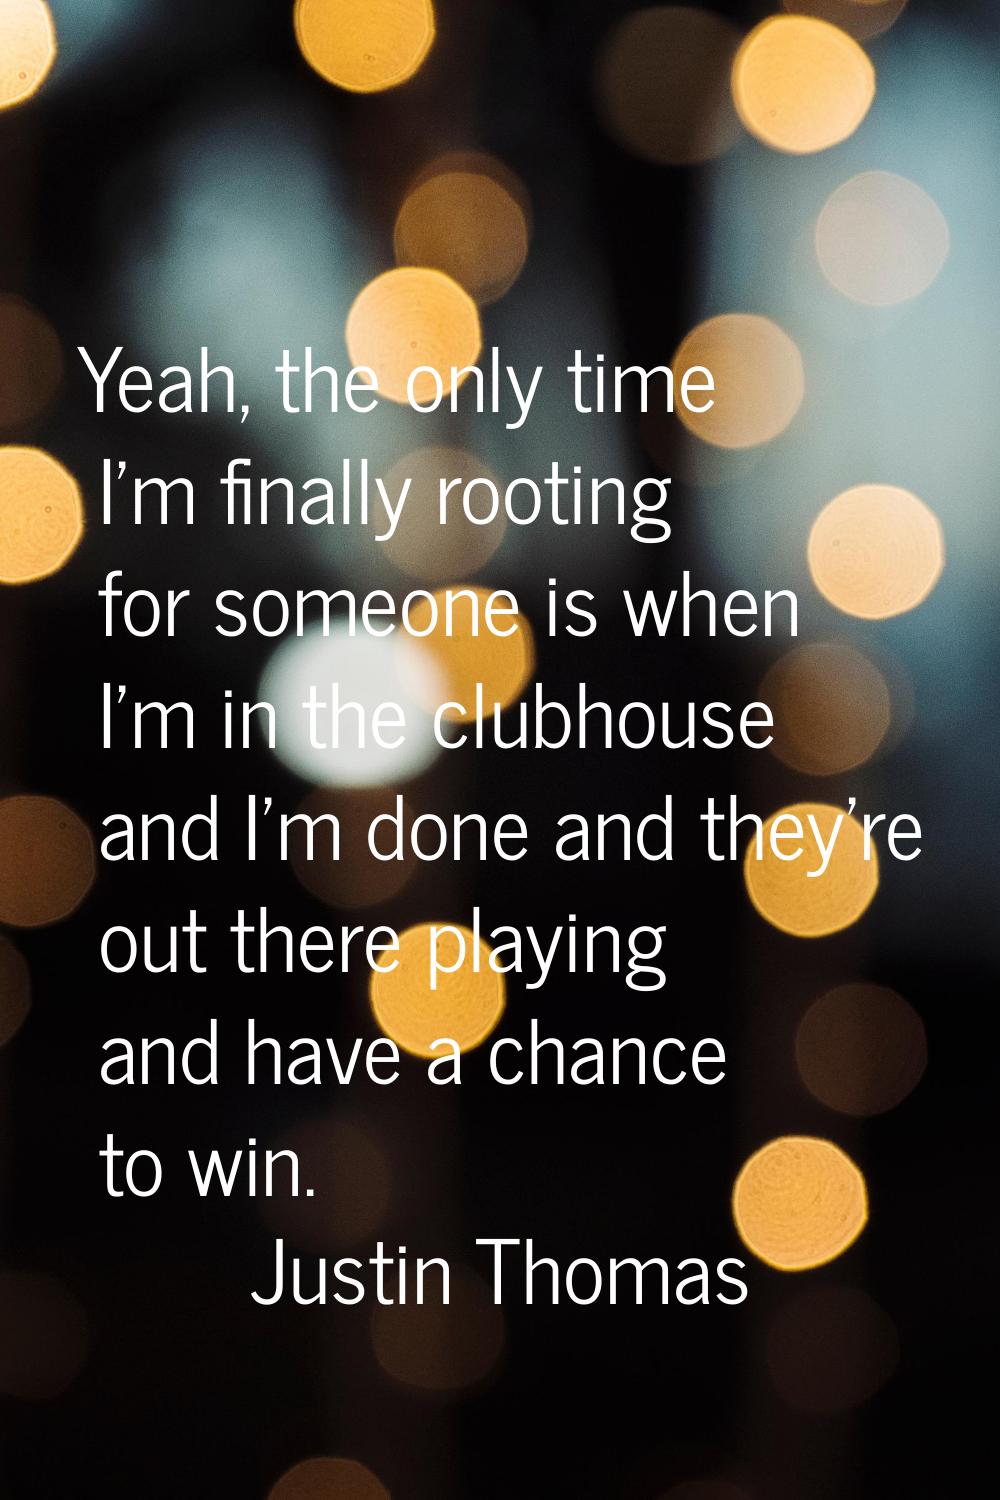 Yeah, the only time I'm finally rooting for someone is when I'm in the clubhouse and I'm done and t